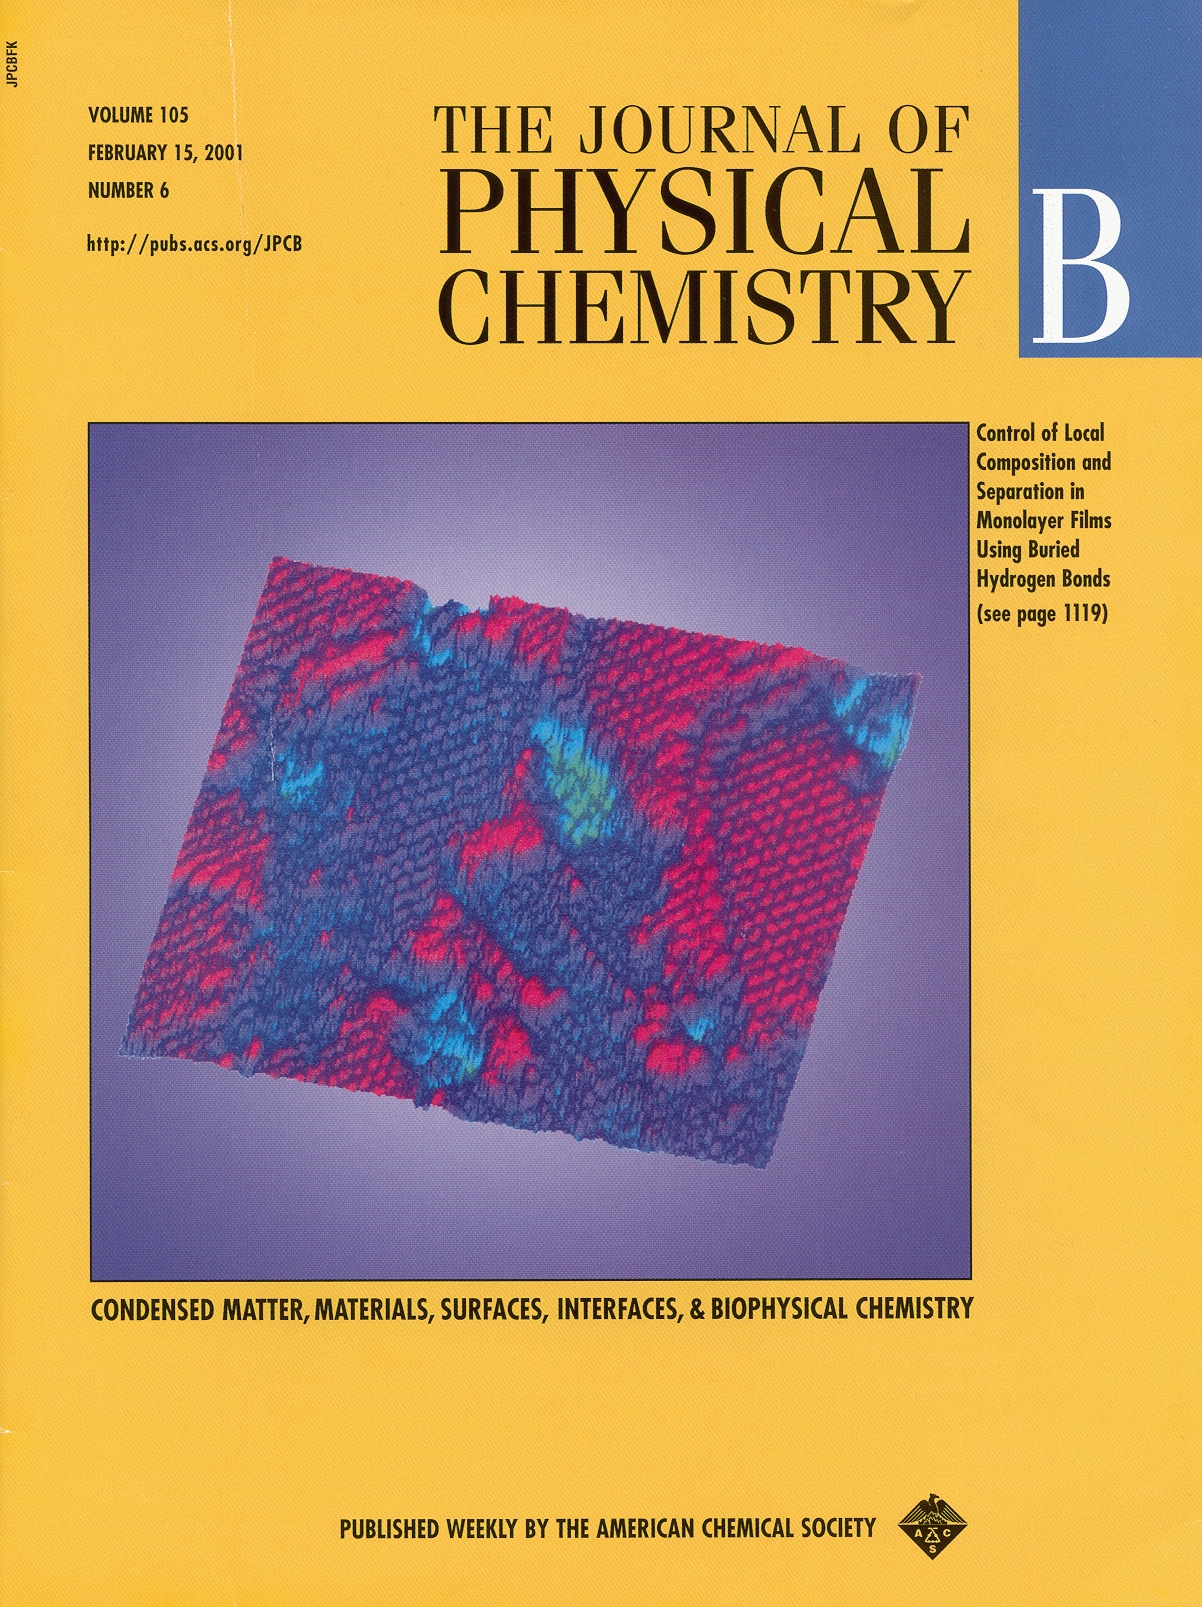 JPhysChemB 15 February 2001 Cover